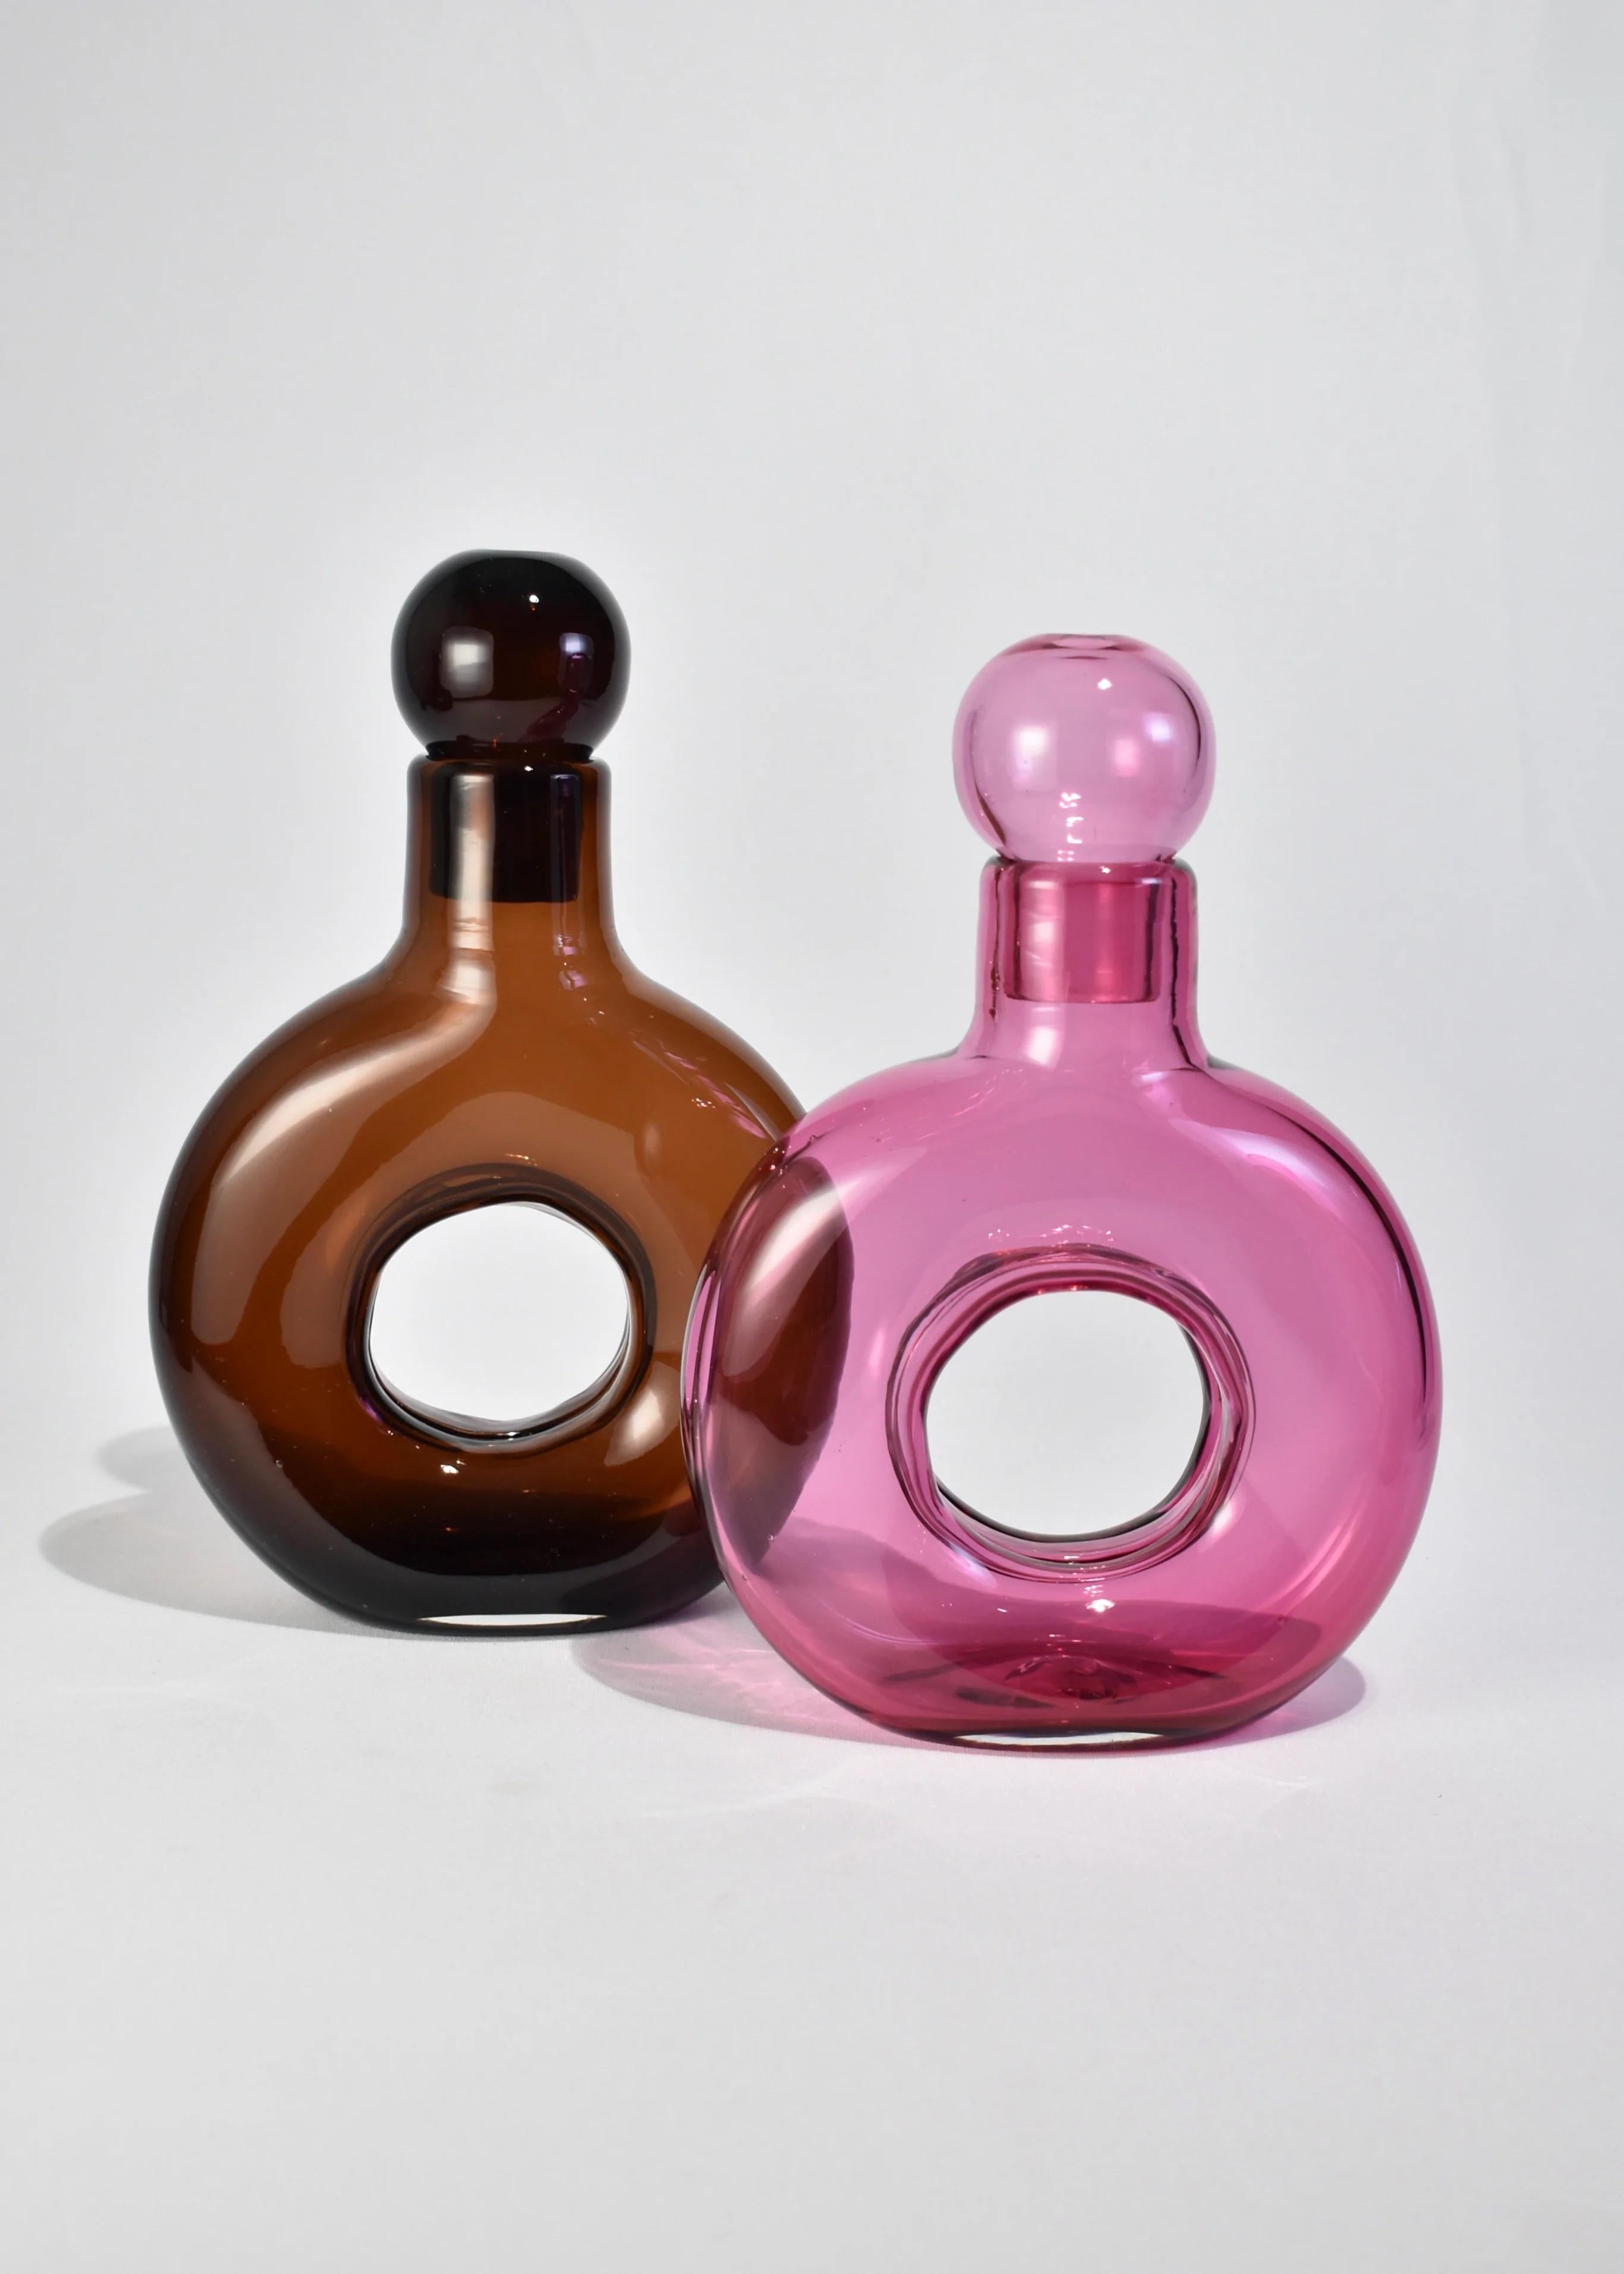 
Our in-house collection pairs modern rounded shapes with colors inspired by ancient Venetian glassware resulting in a functional, beautiful piece to be admired and used often. Each vessel is hand blown in Richmond, Virginia and one of a